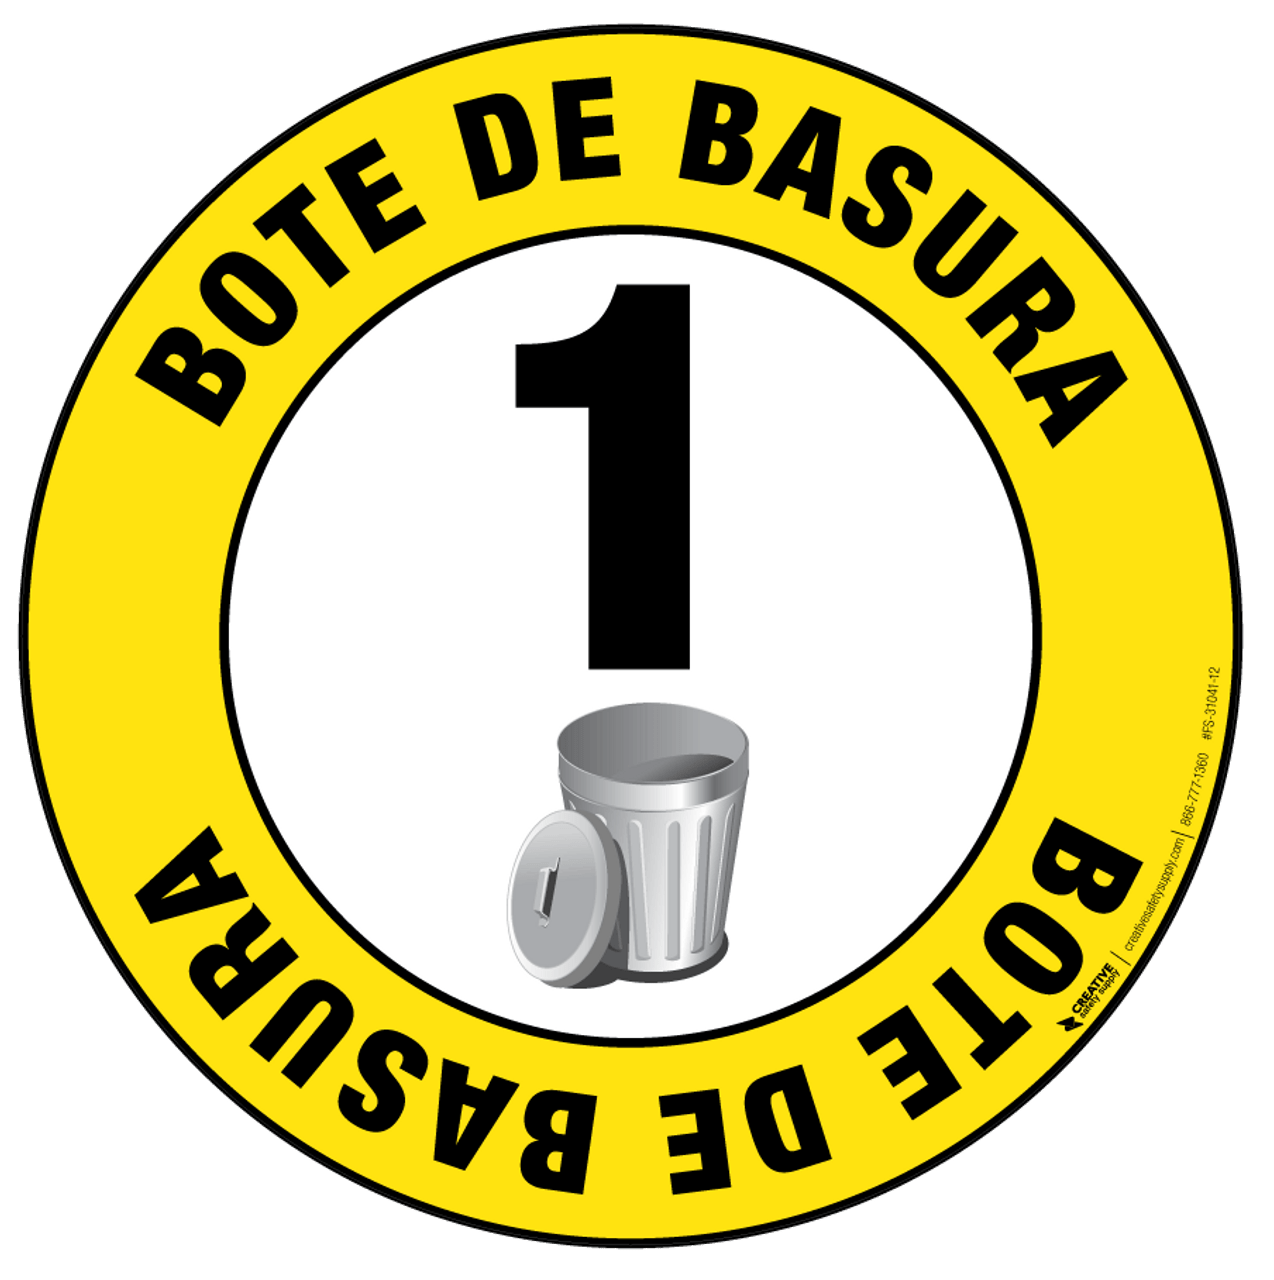 Bote de Basura (Trash Can) - Floor Sign (with numbering)